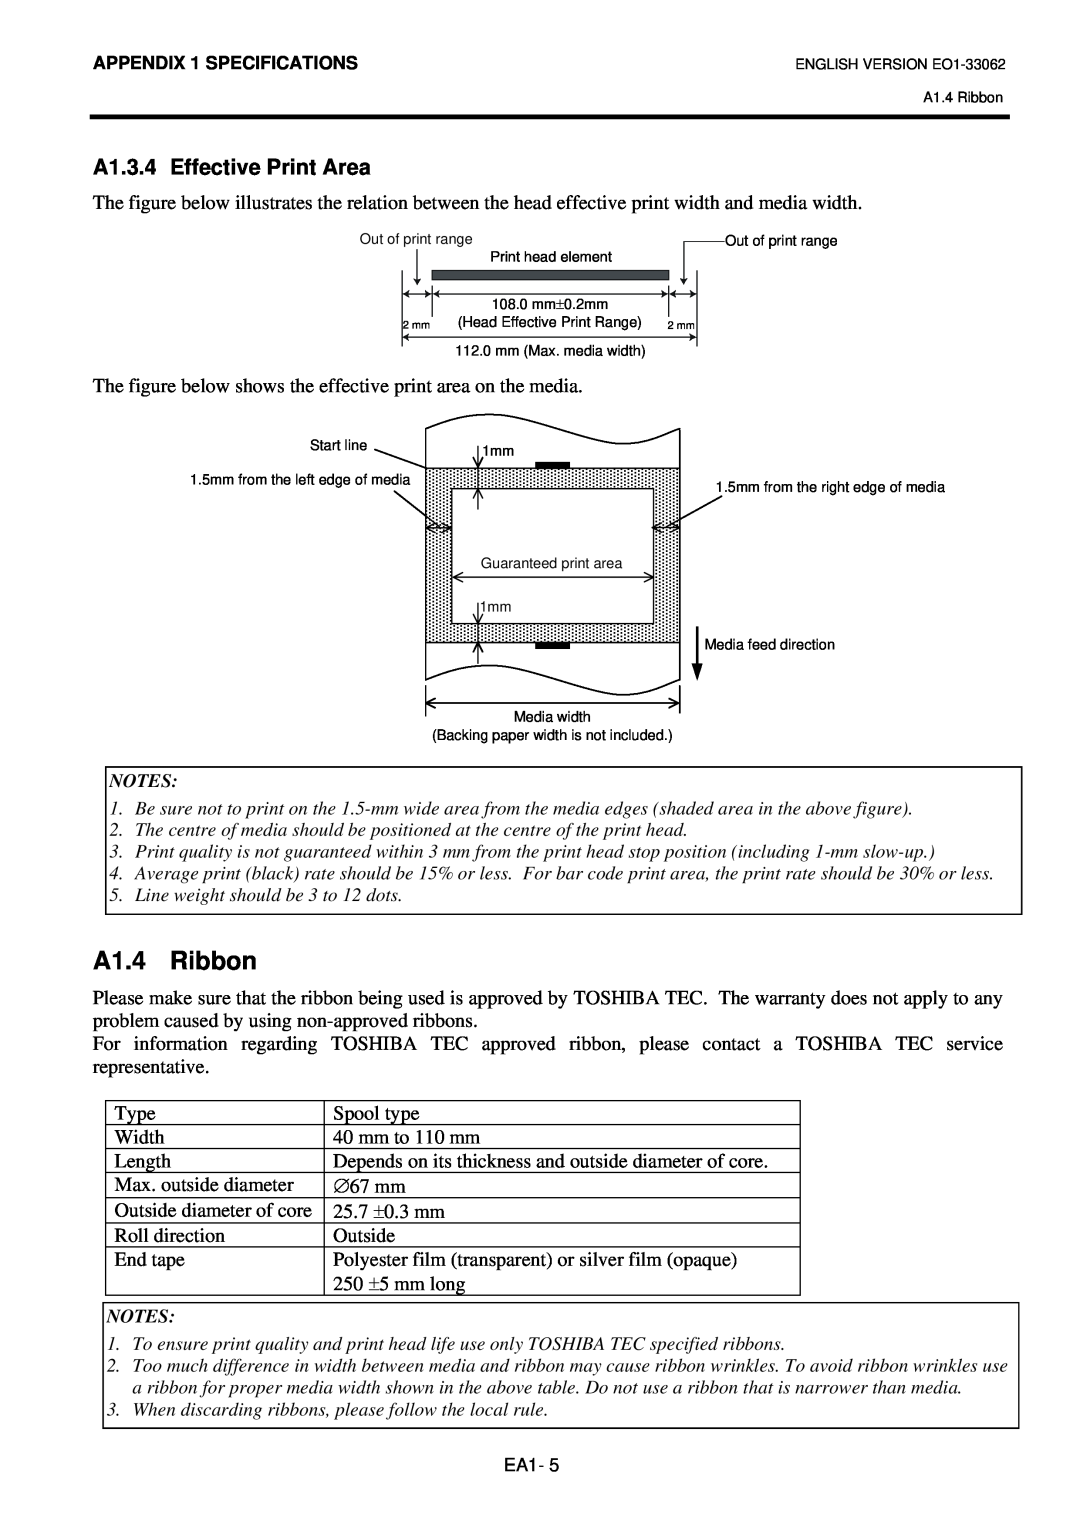 Toshiba B-SV4T owner manual A1.4 Ribbon, A1.3.4 Effective Print Area 